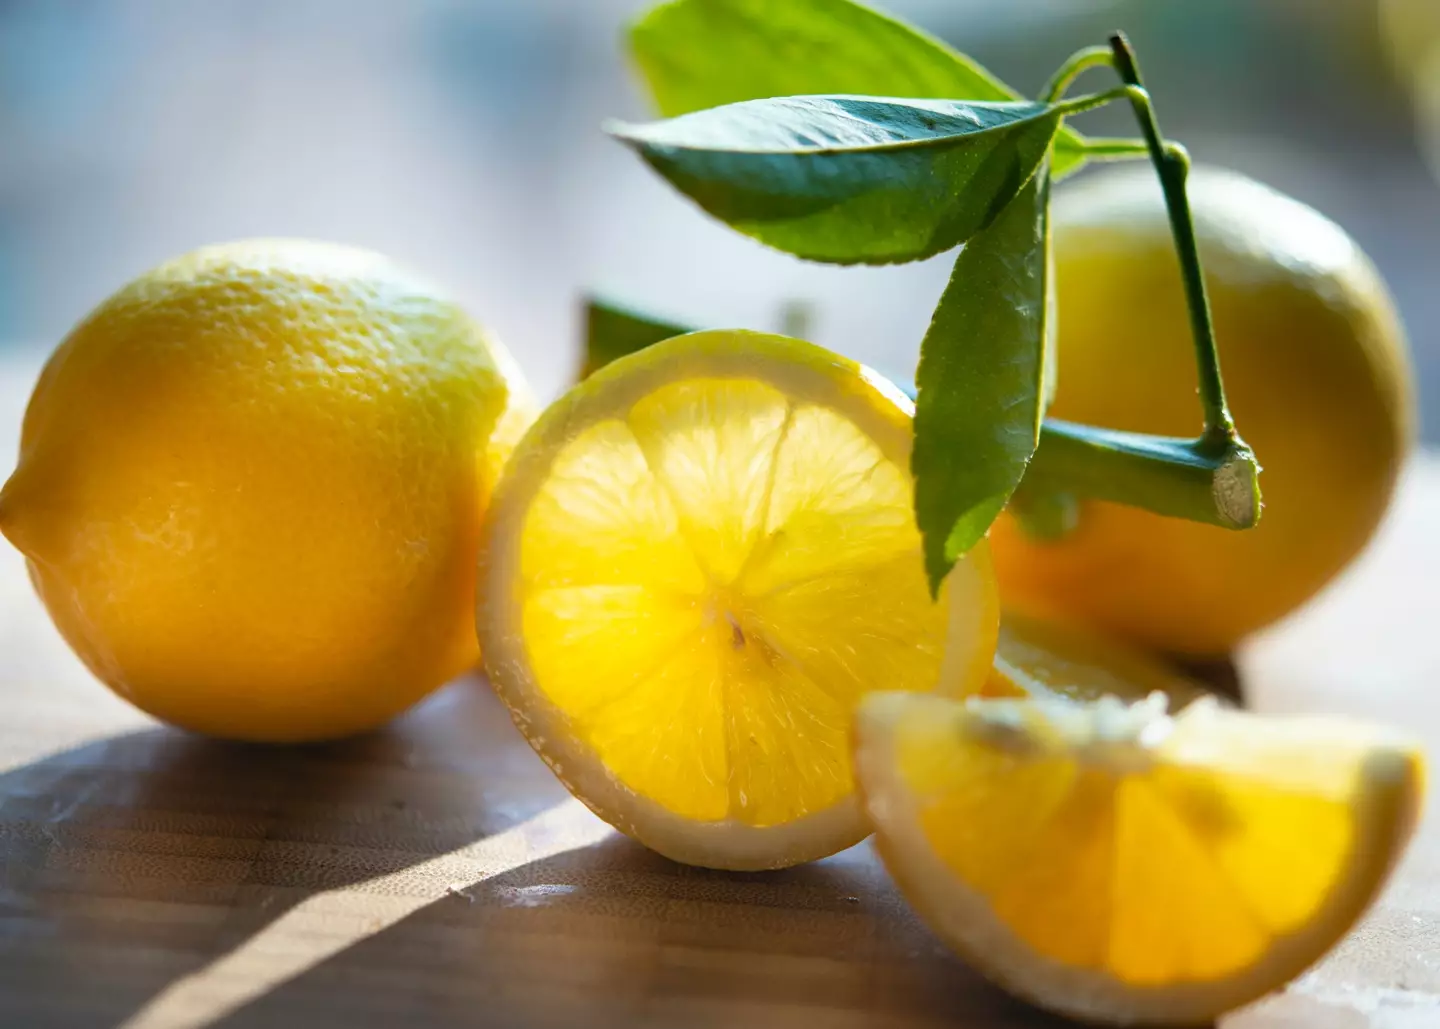 Lily Chapman explains that lemons “are a rich source of vitamin C and provide the body with essential antioxidants and minerals needed for immunity" (Cristina Anne Costello on Unsplash).